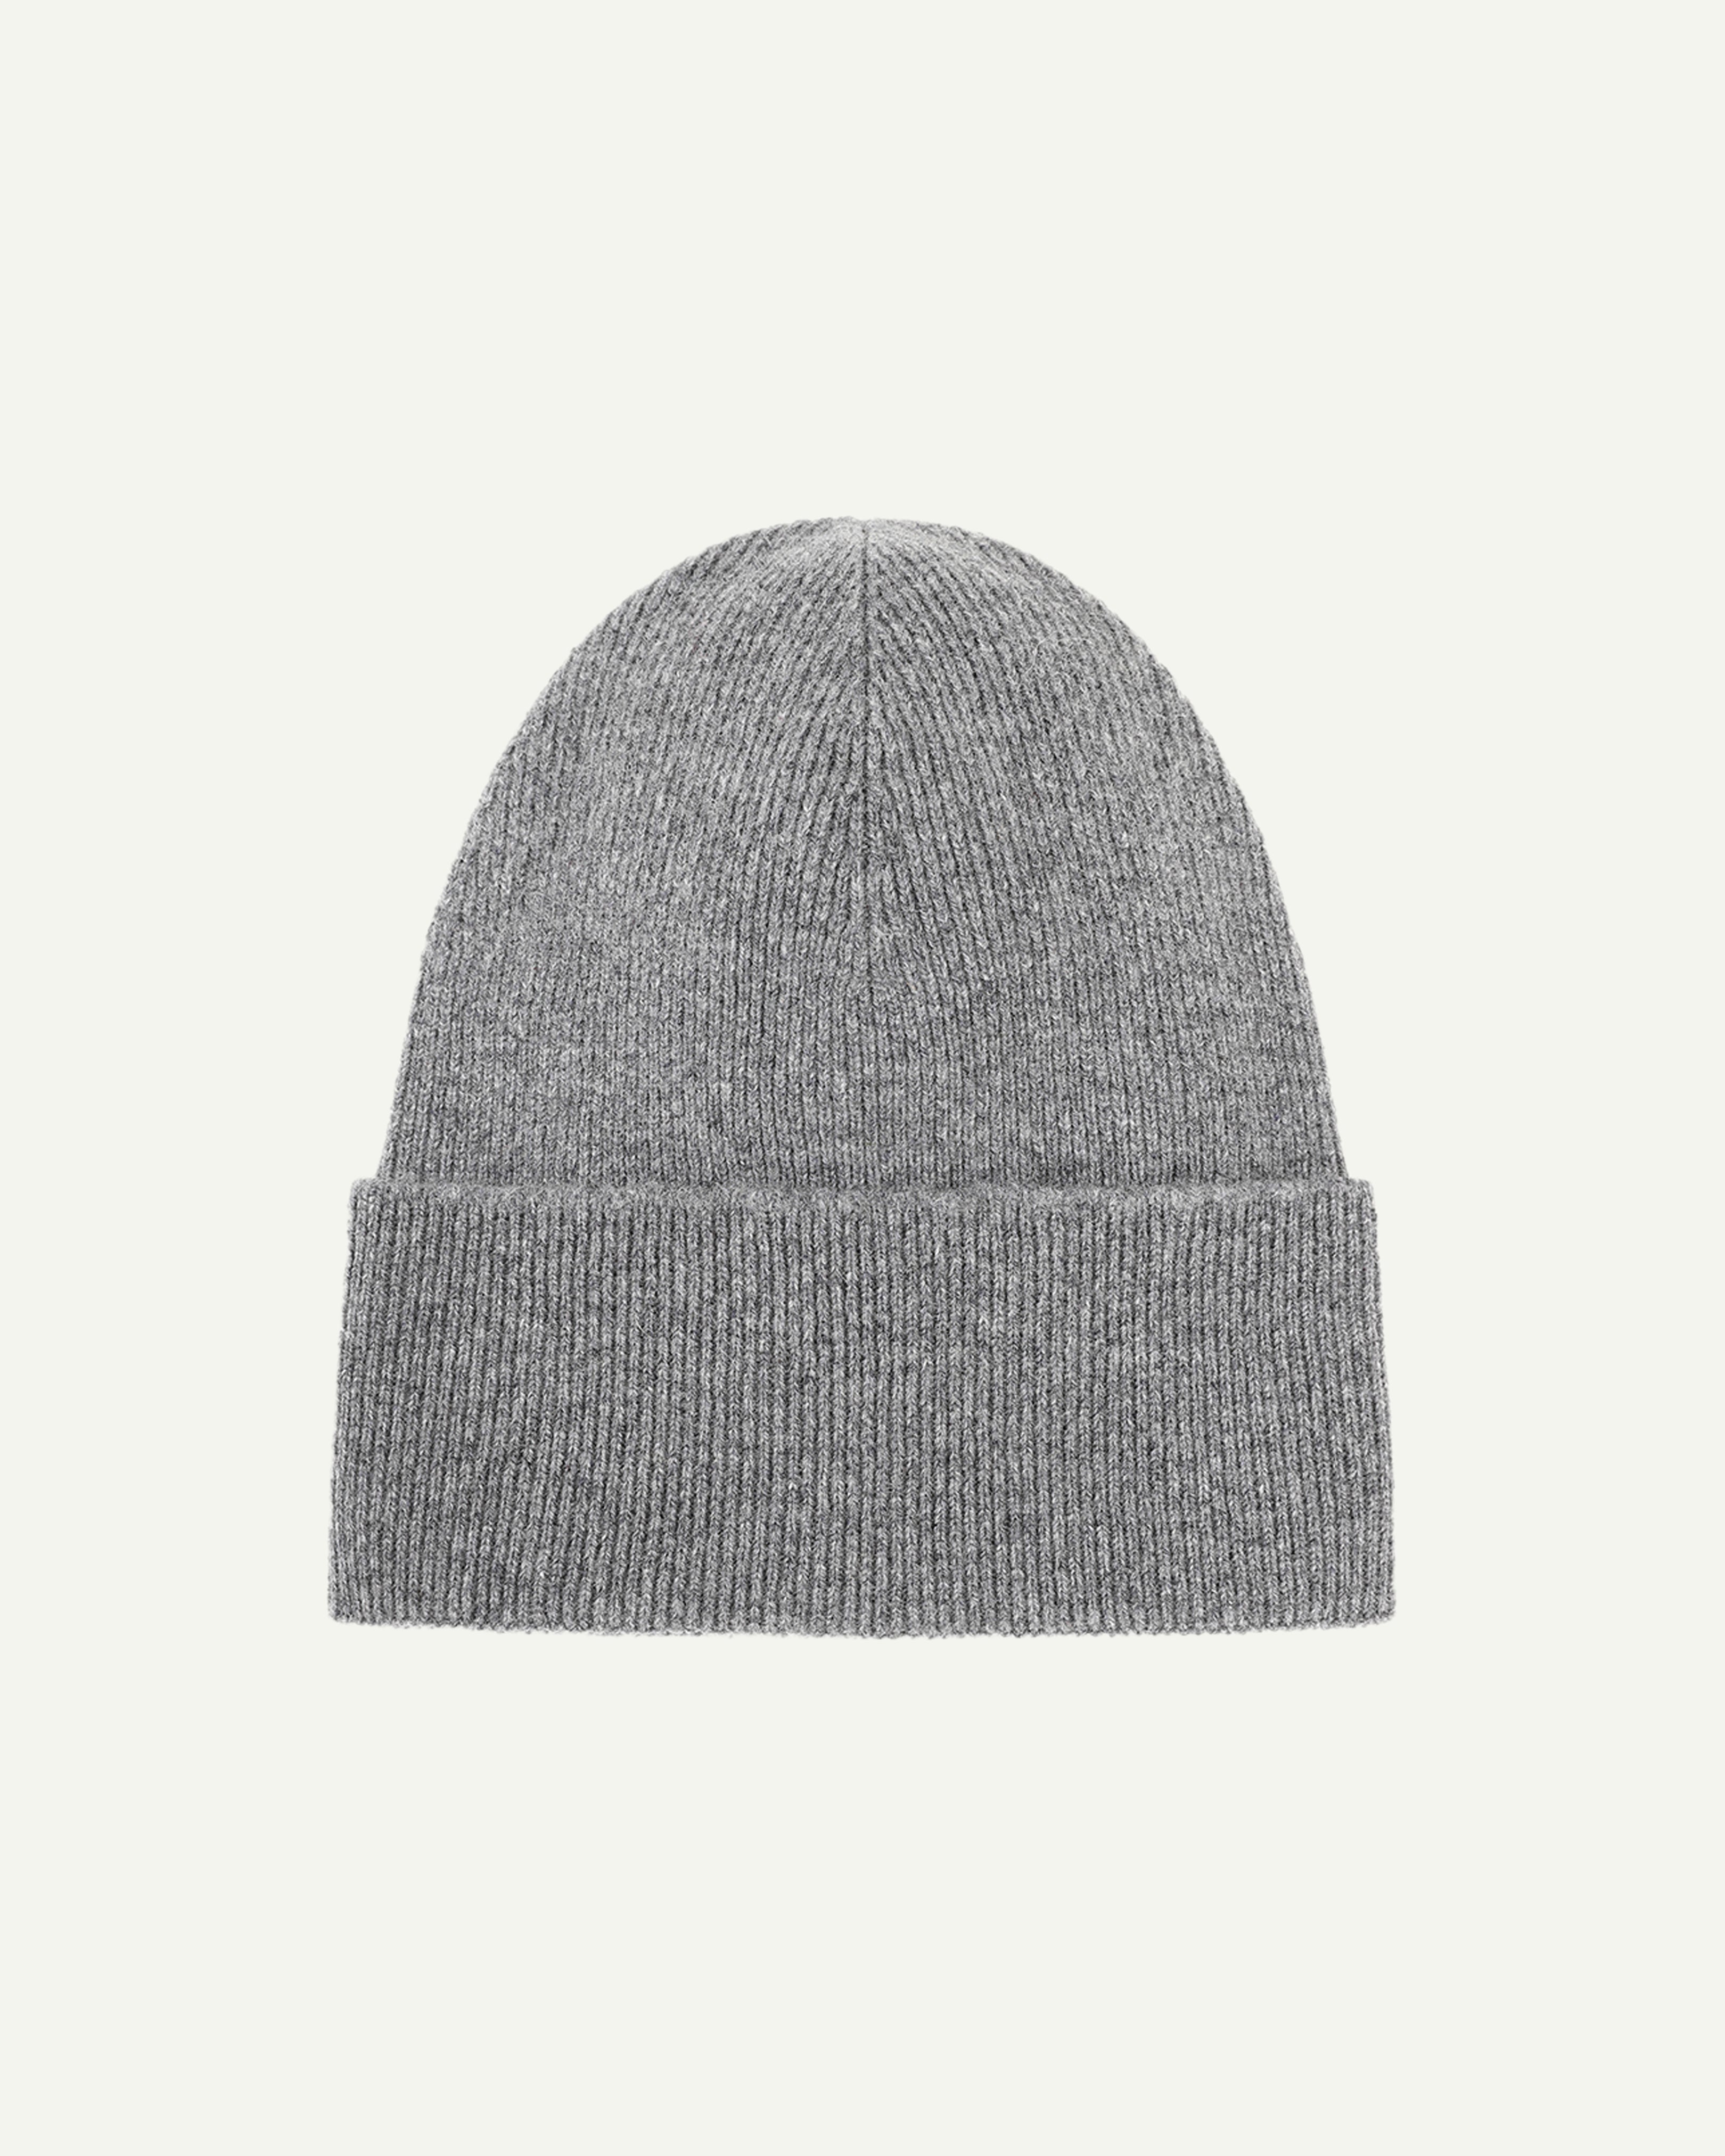 Flat view of Uskees 4004 grey wool hat, showing a clear view of the adjustable cuff and the ribbed texture of this light grey hat.